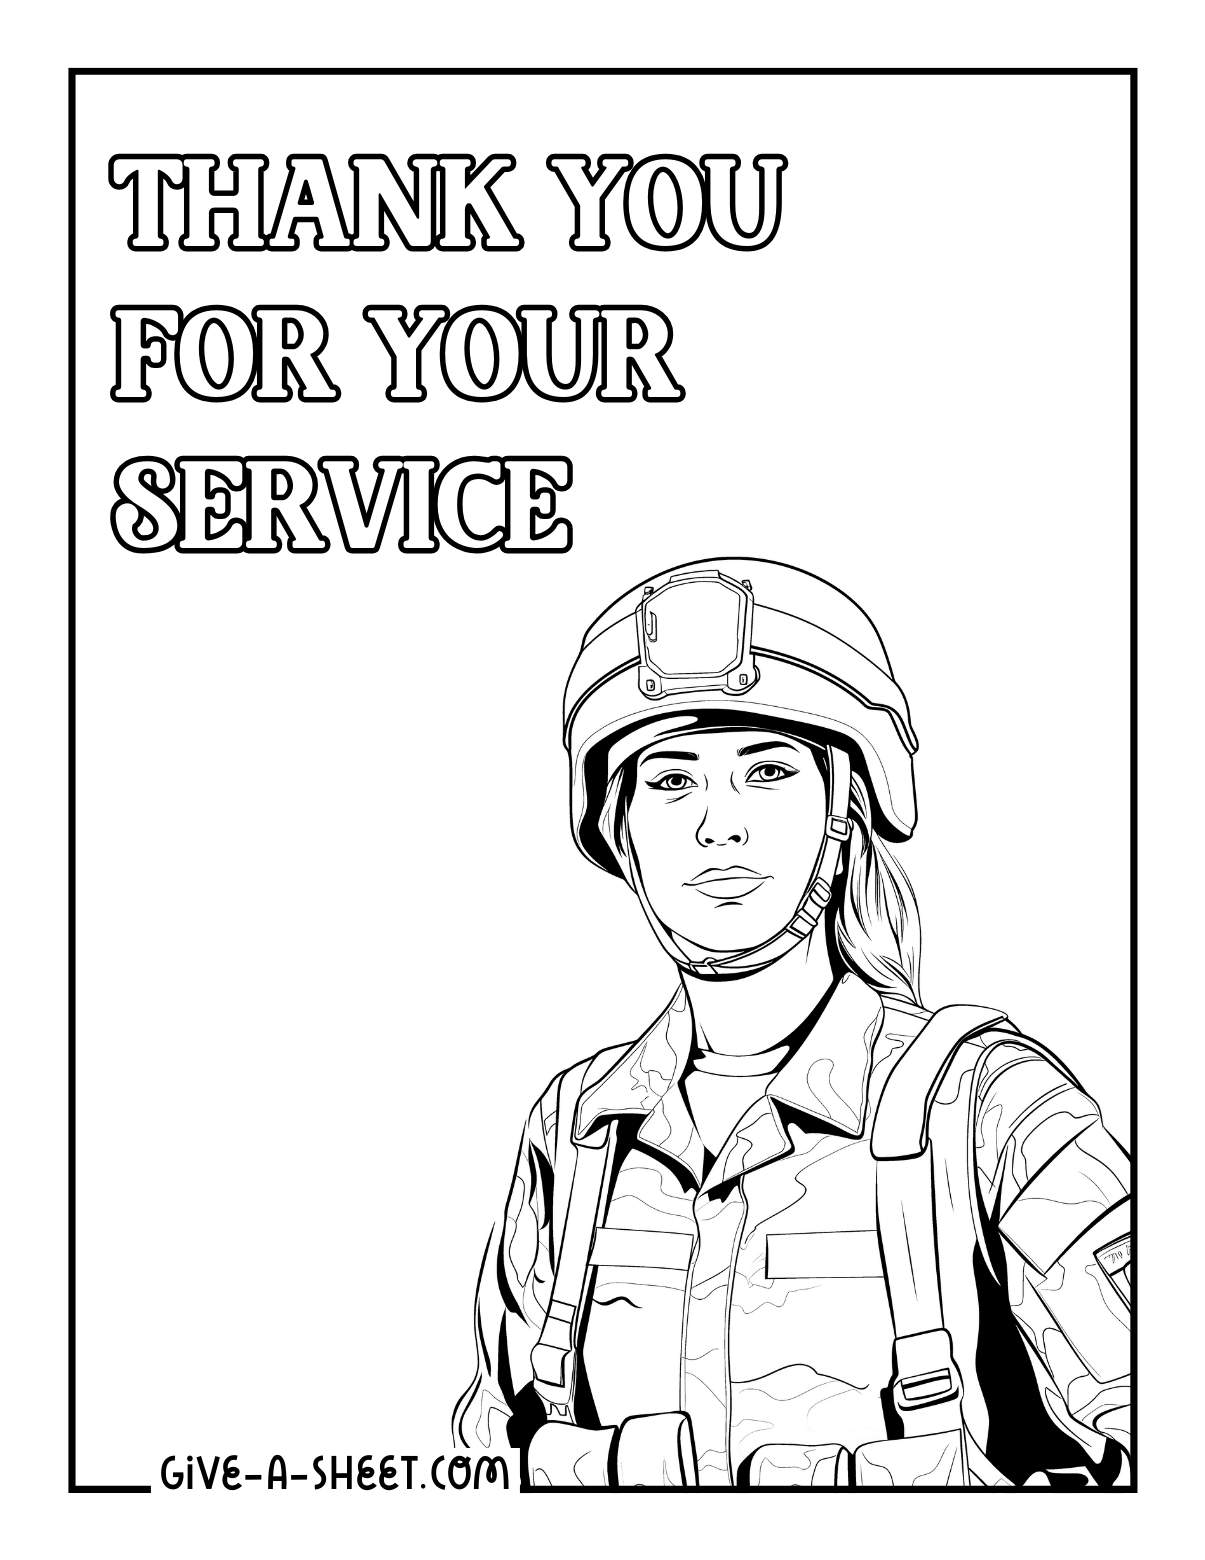 Woman soldier uniform on memorial day coloring page.